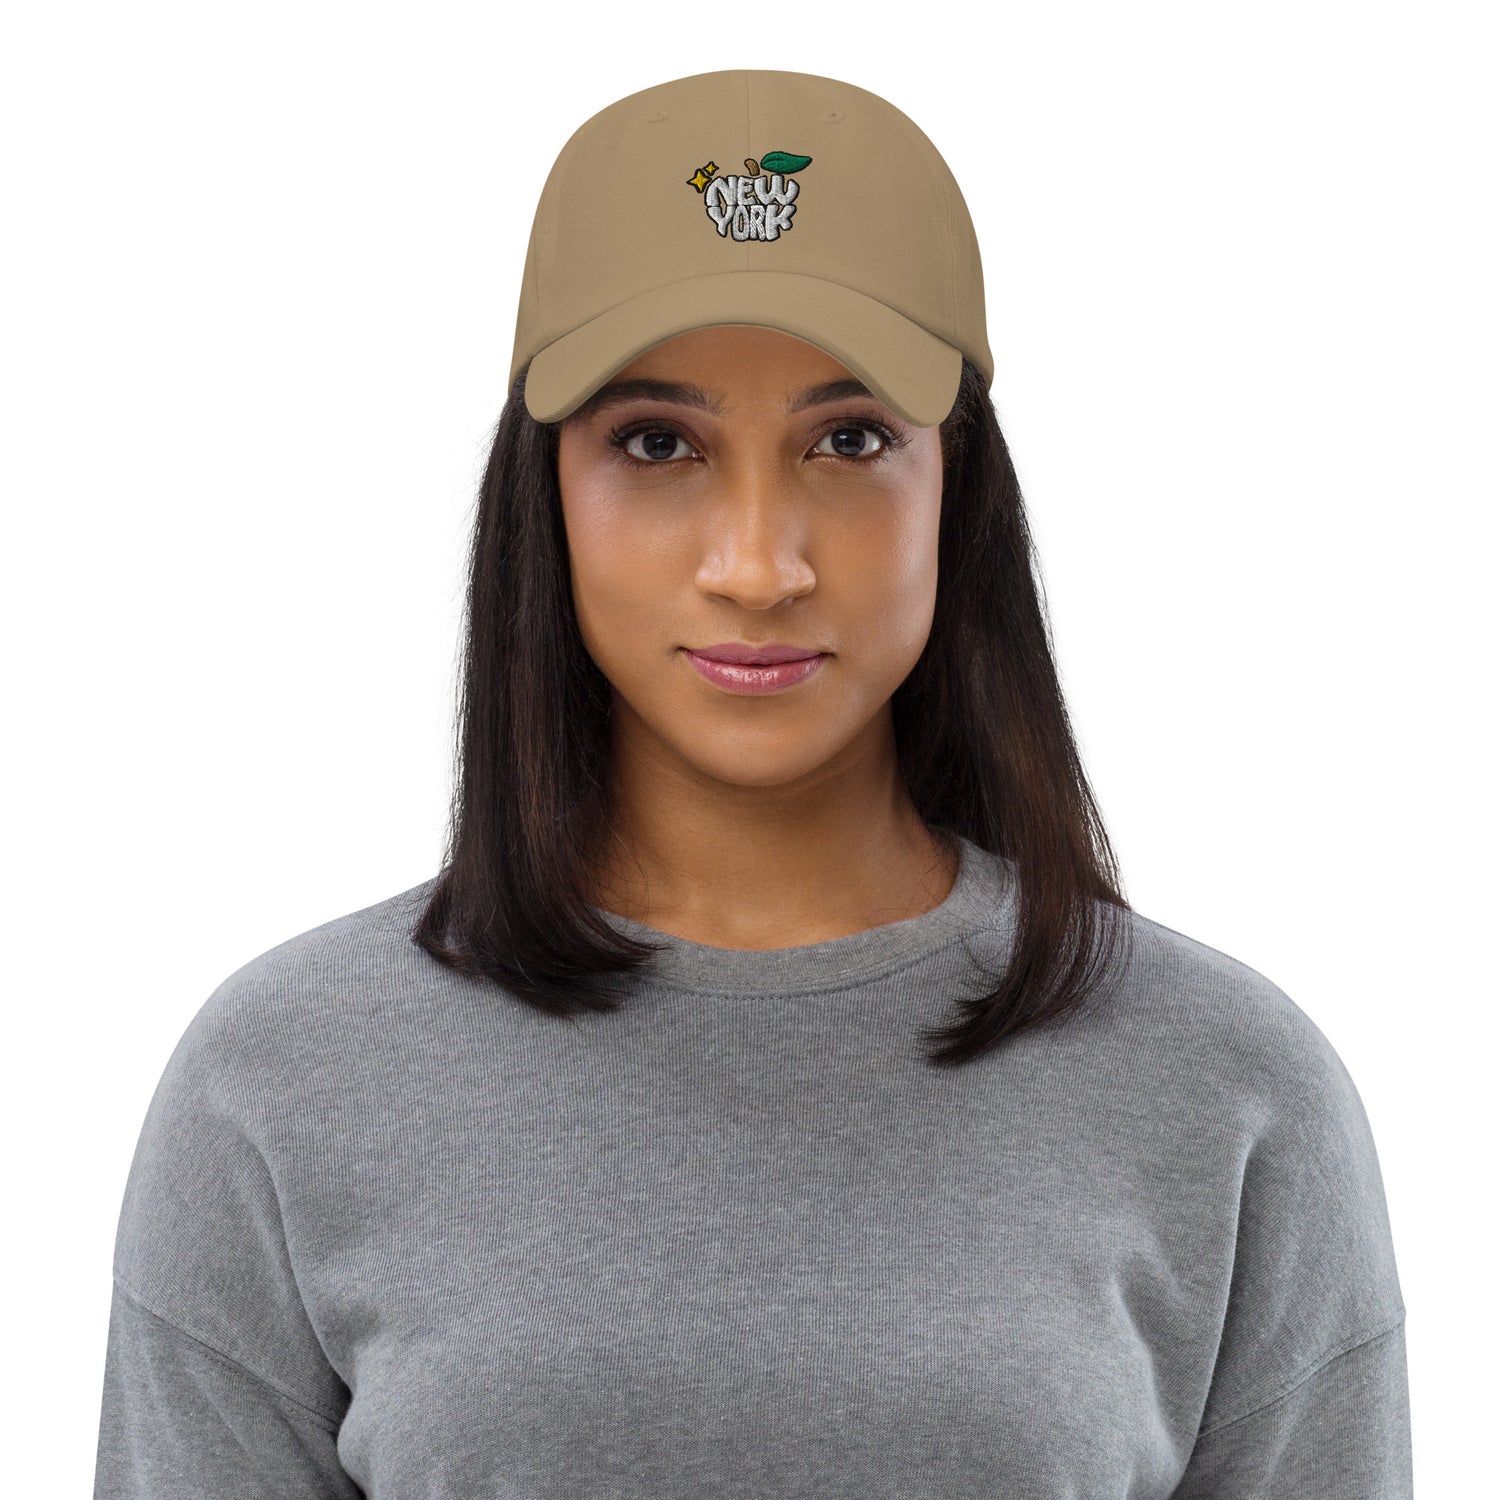 New York Apple Logo Embroidered Khaki Dad Hat Scattered Streetwear